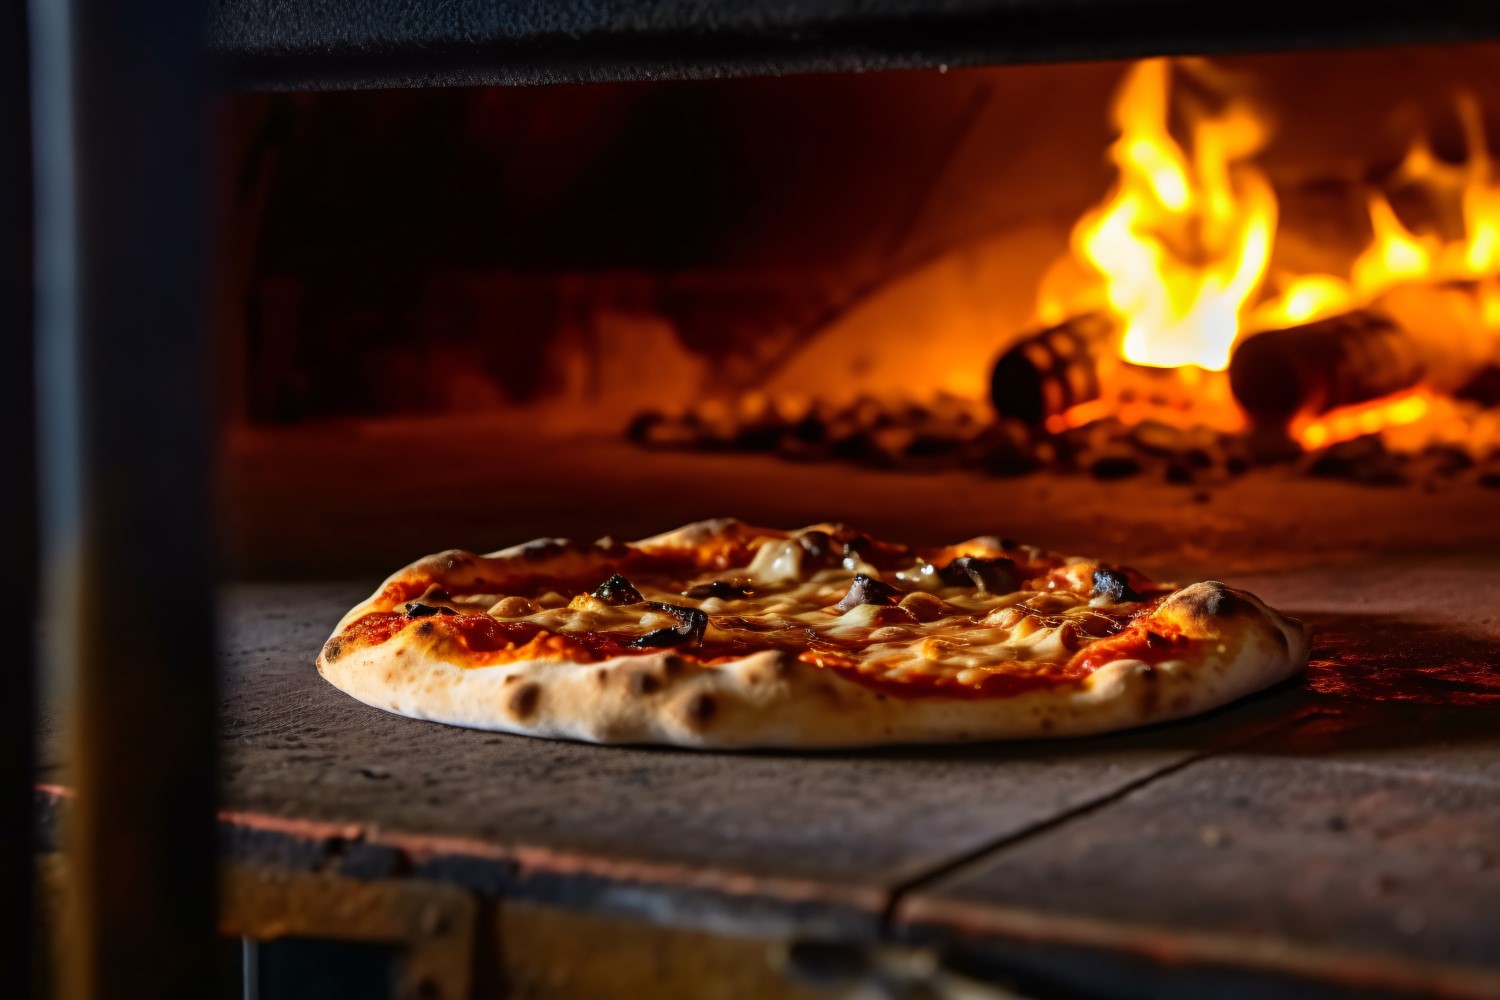 Pizzas on a pizza stone in front of a fire 40